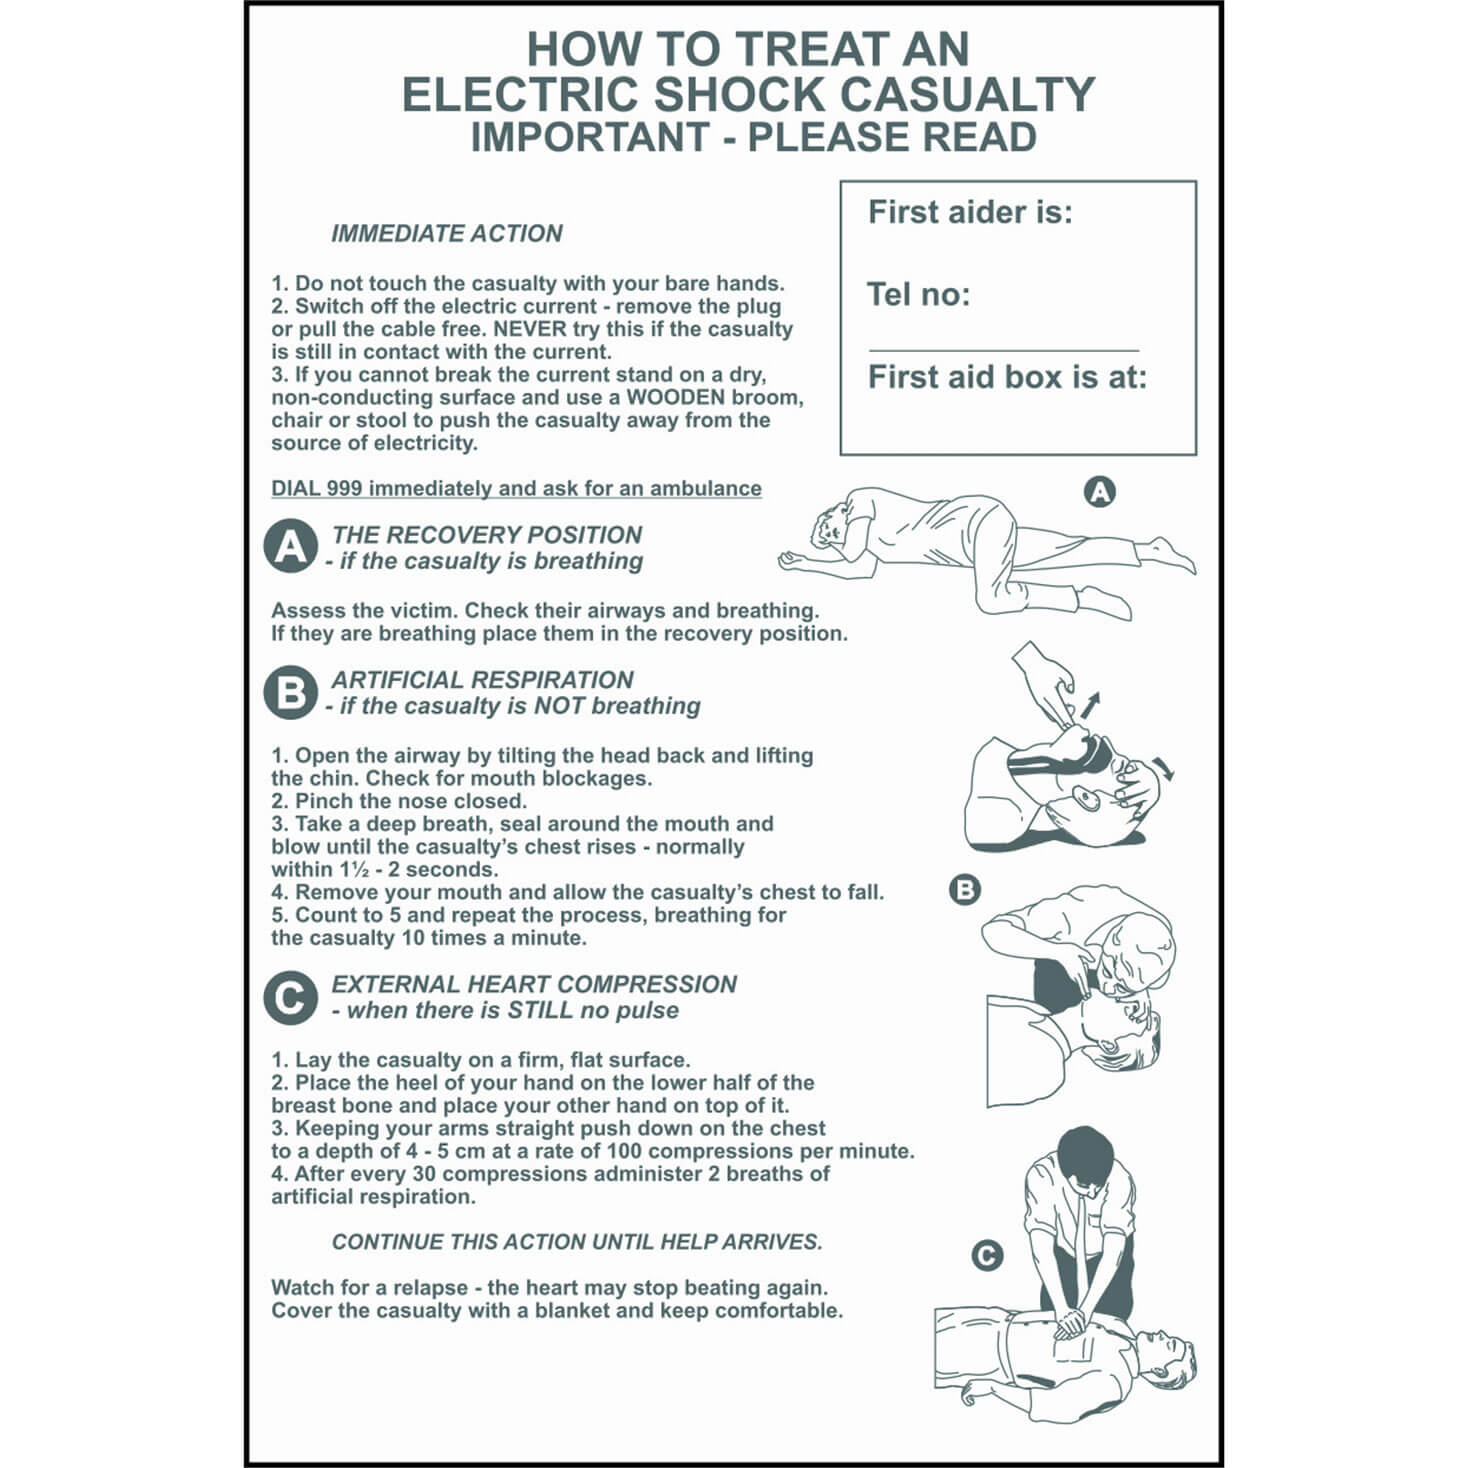 Scan 400 x 600mm PVC Sign - How To Treat An Electric Shock Casualty